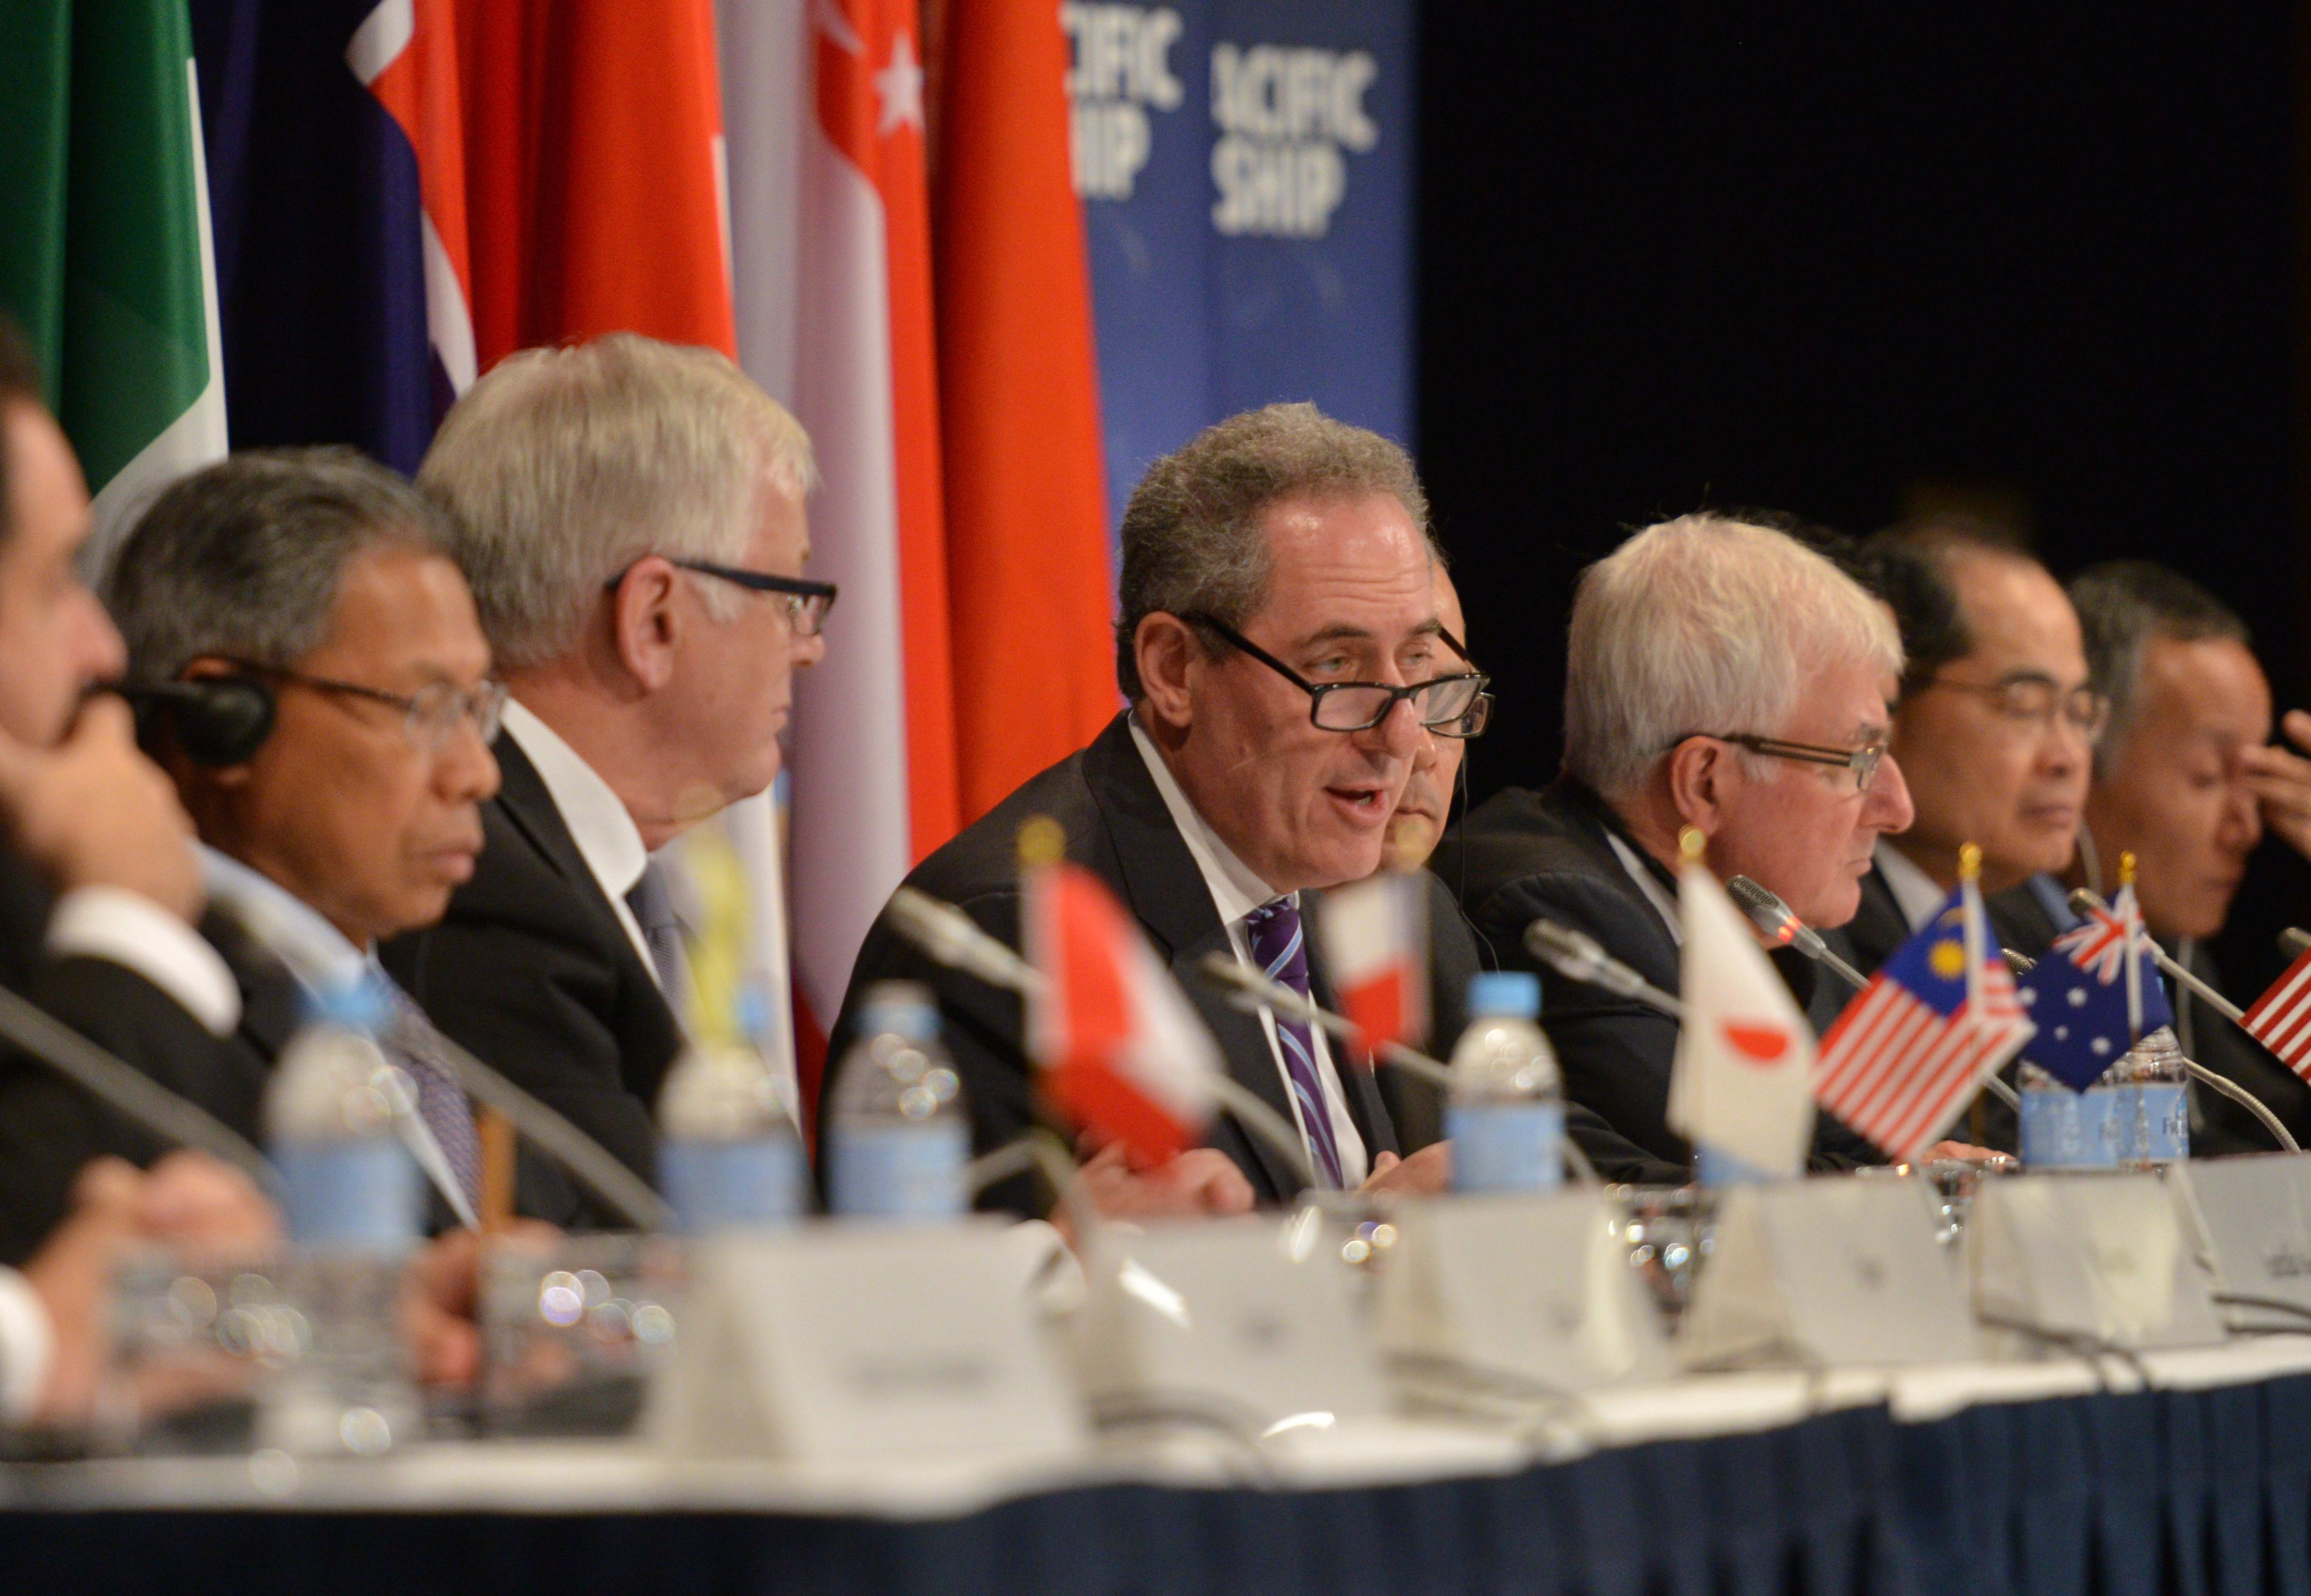 US Trade Representative Mike Froman (C) speaks at a press conference for the Trans-Pacific Partnership (TPP), in Sydney last year.